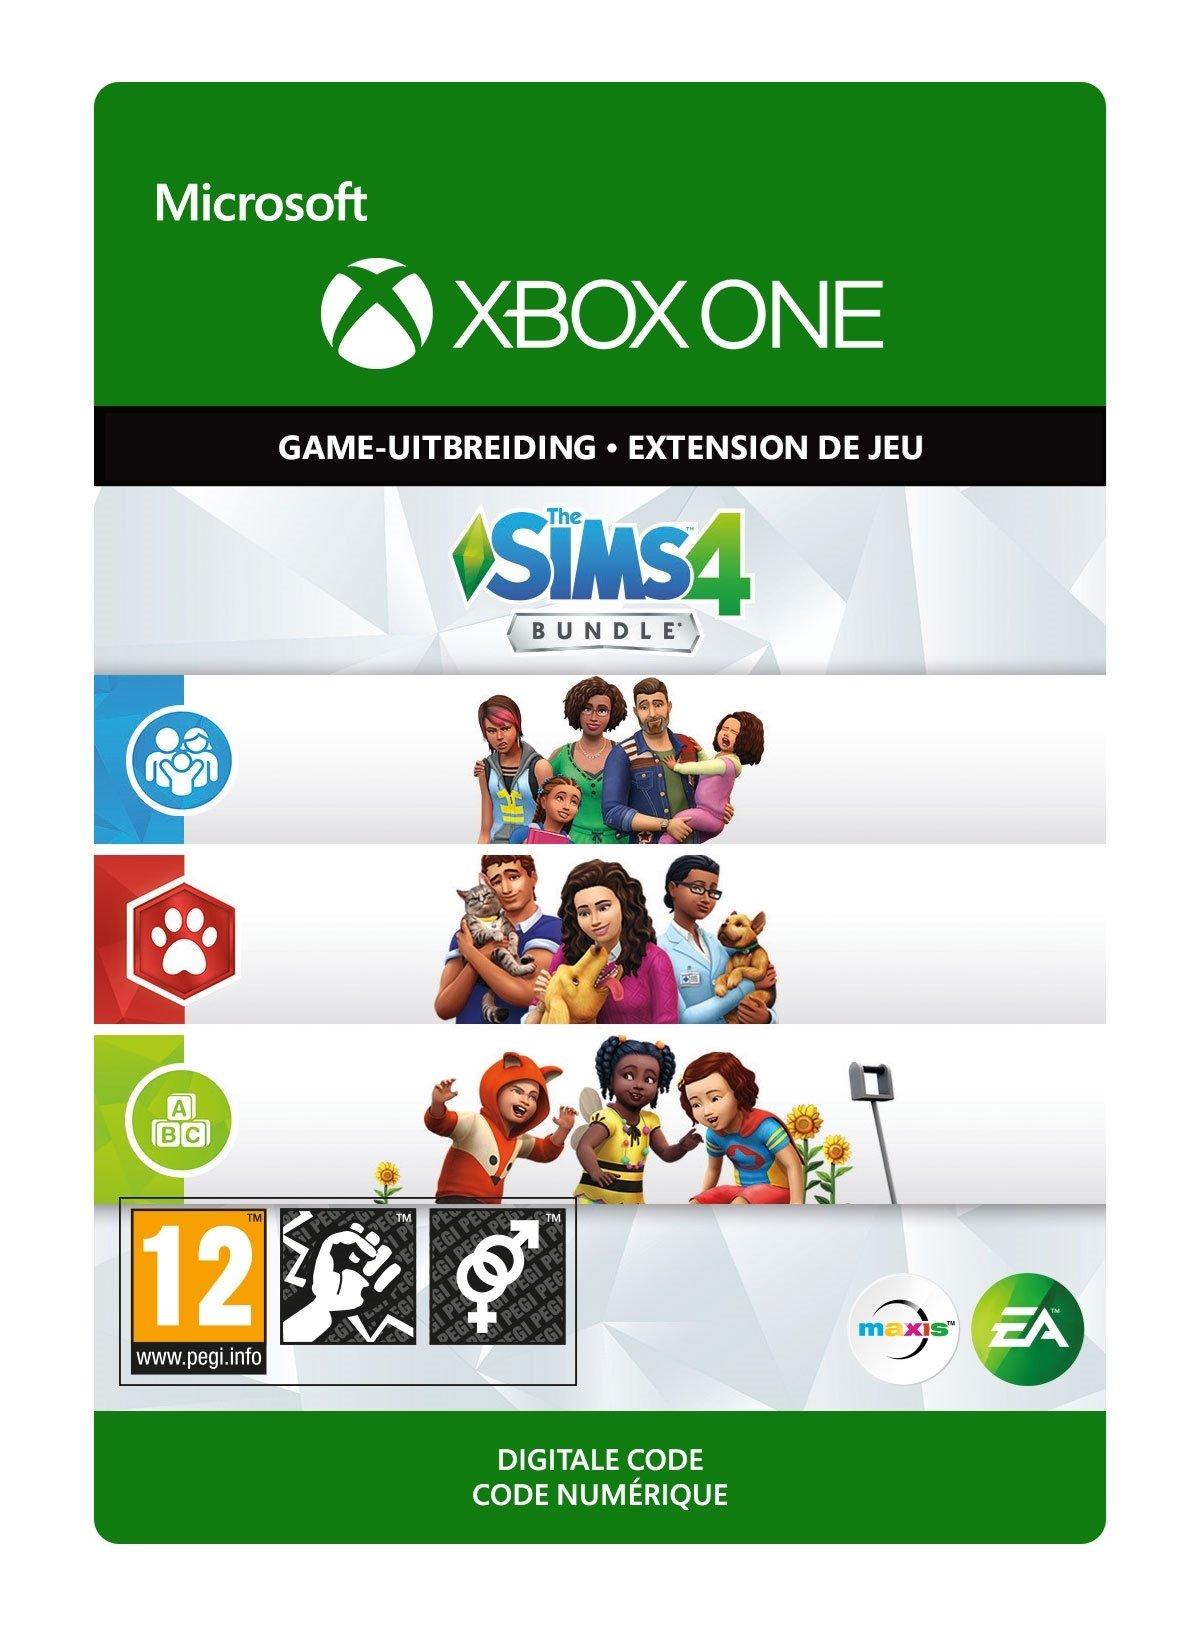 The Sims 4: Bundle - Cats & Dogs, Parenthood, Toddler Stuff - Xbox One - Add-on | 7D4-00333 (19a38b26-33fe-204f-87e0-b134bf1989da)